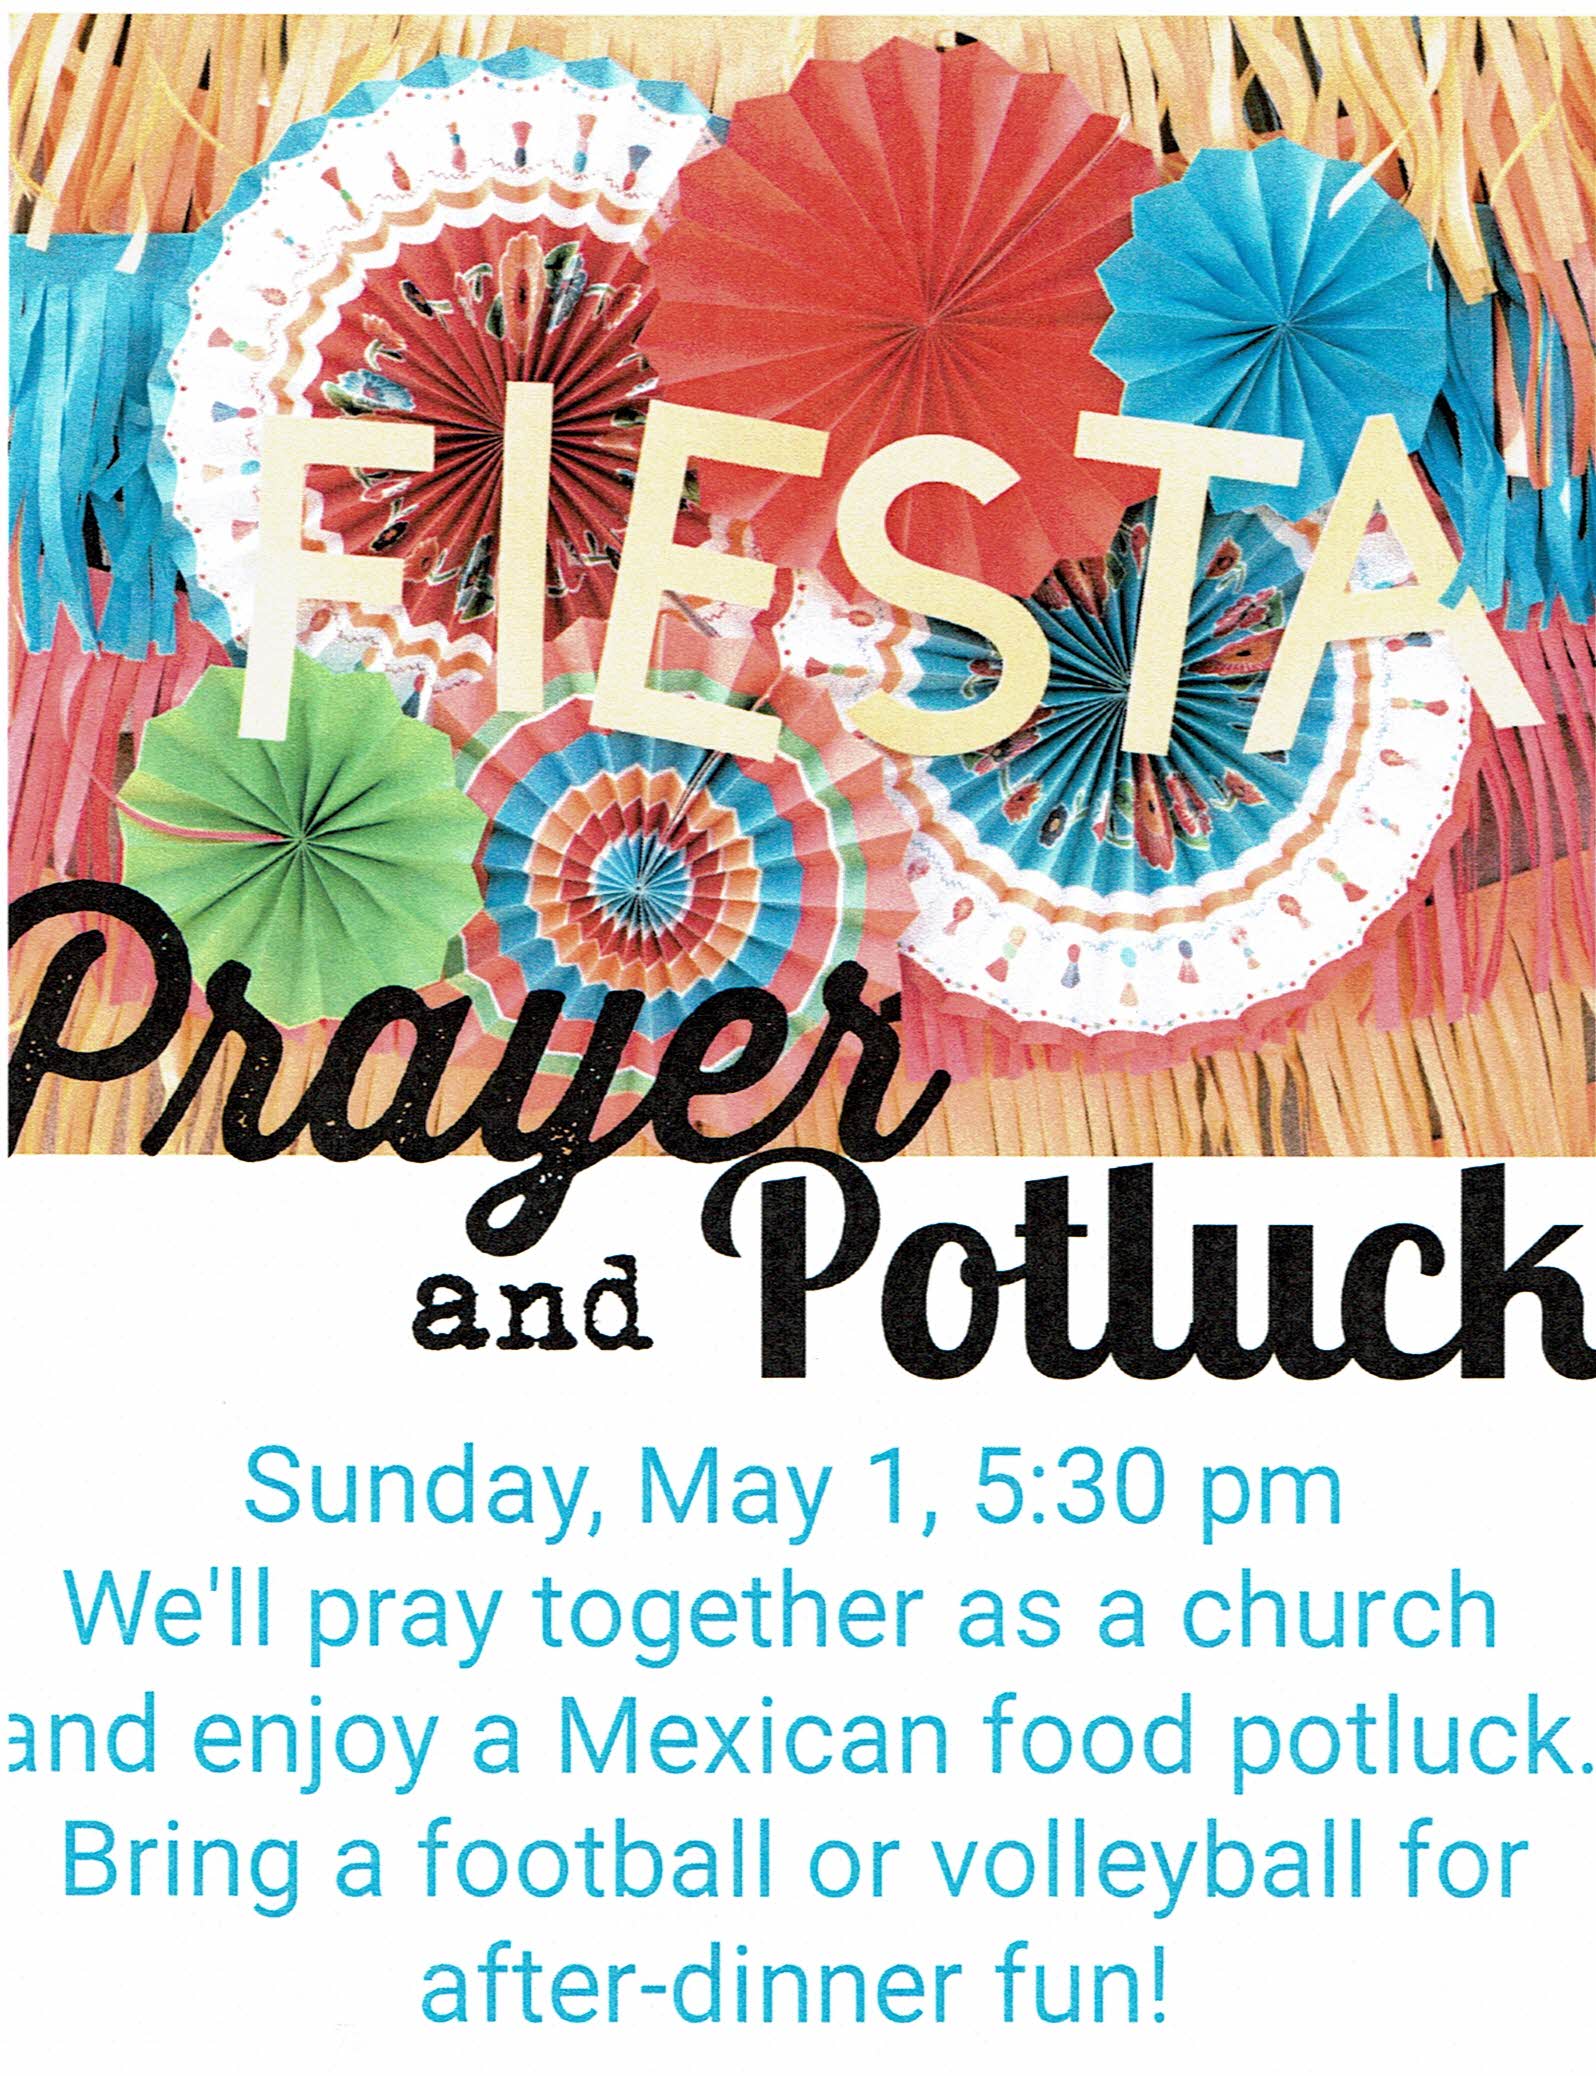 Monthly Prayer and Potluck Meeting:  Oct 2, 2022